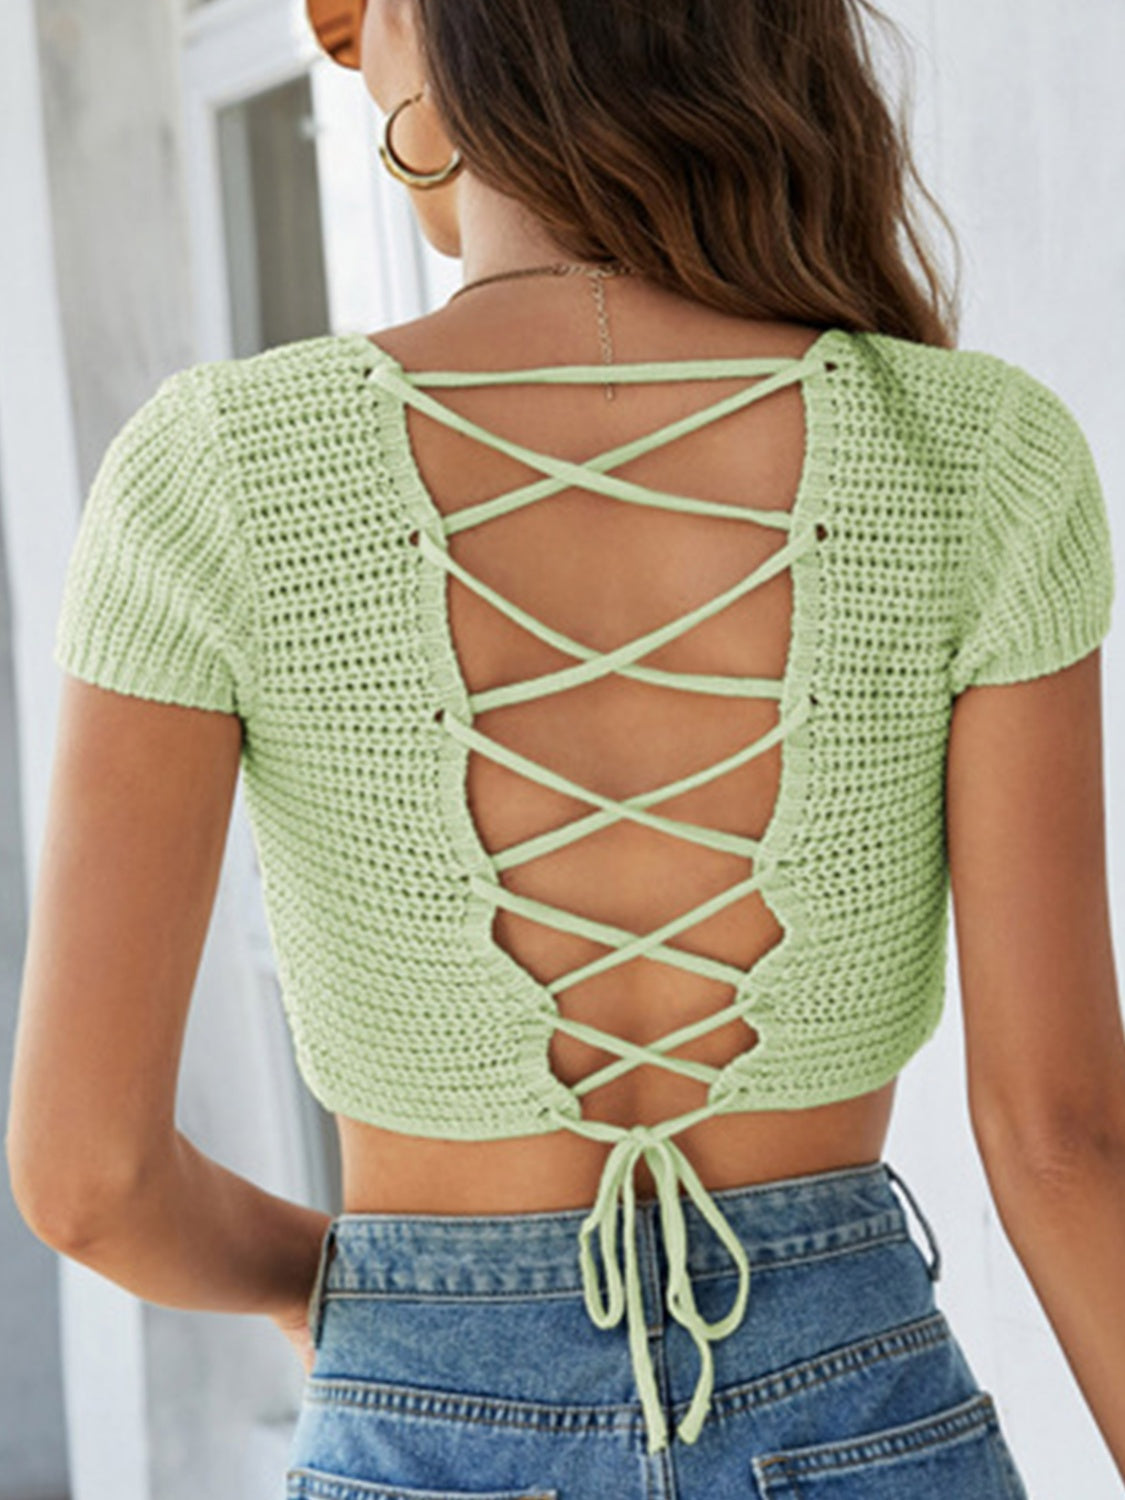 Lace-Up Openwork Square Neck Sweater